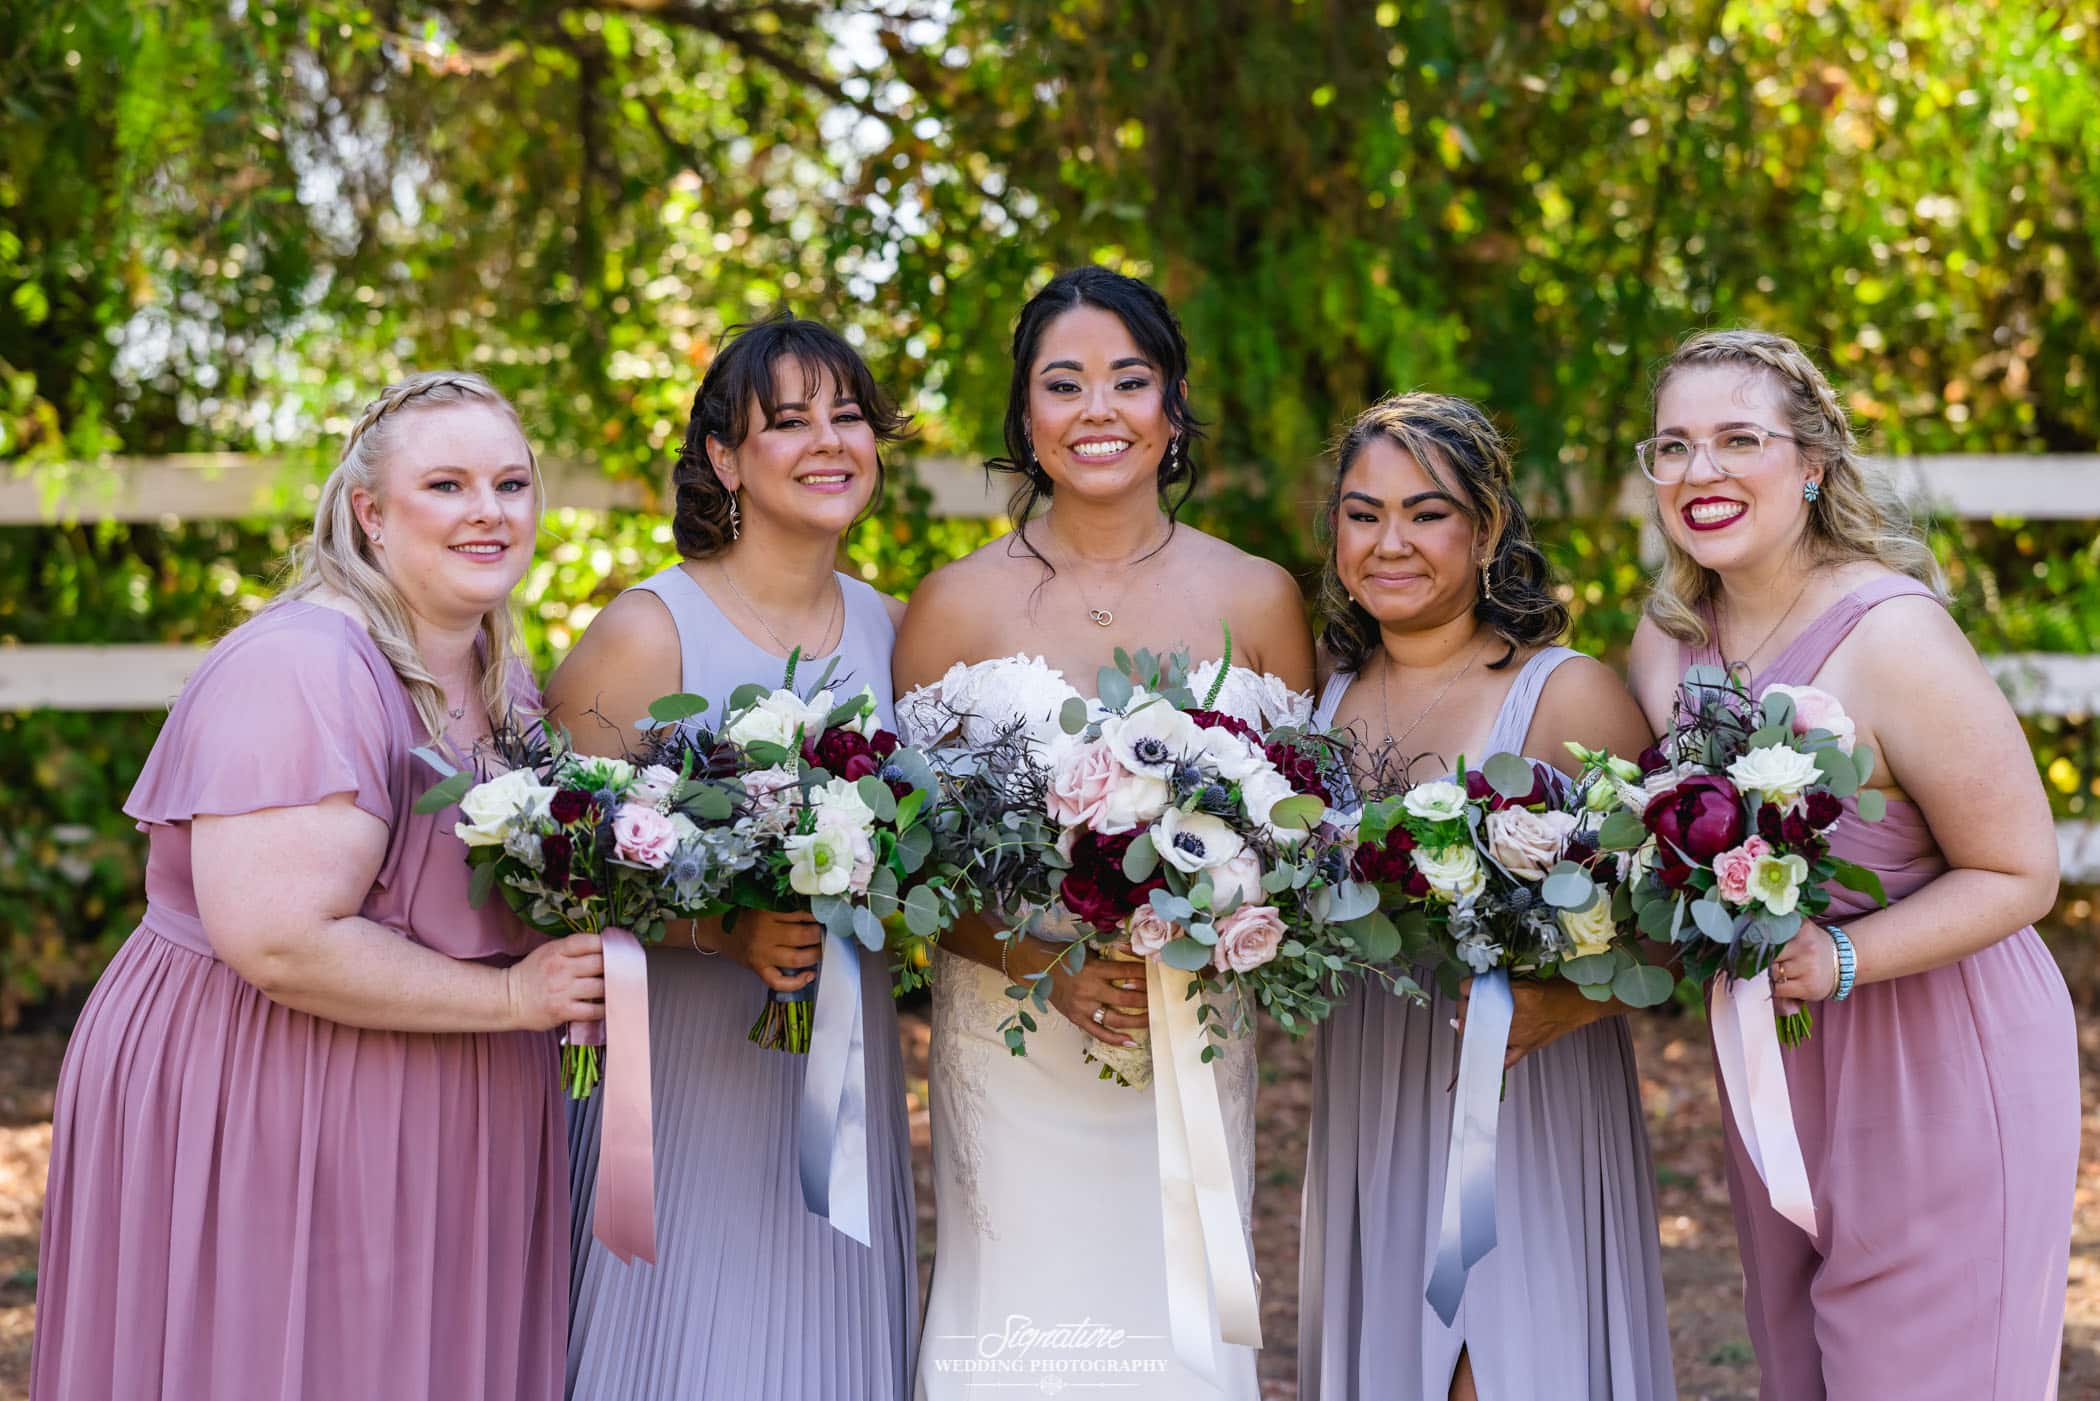 Bride and bridesmaids smiling with bouquets